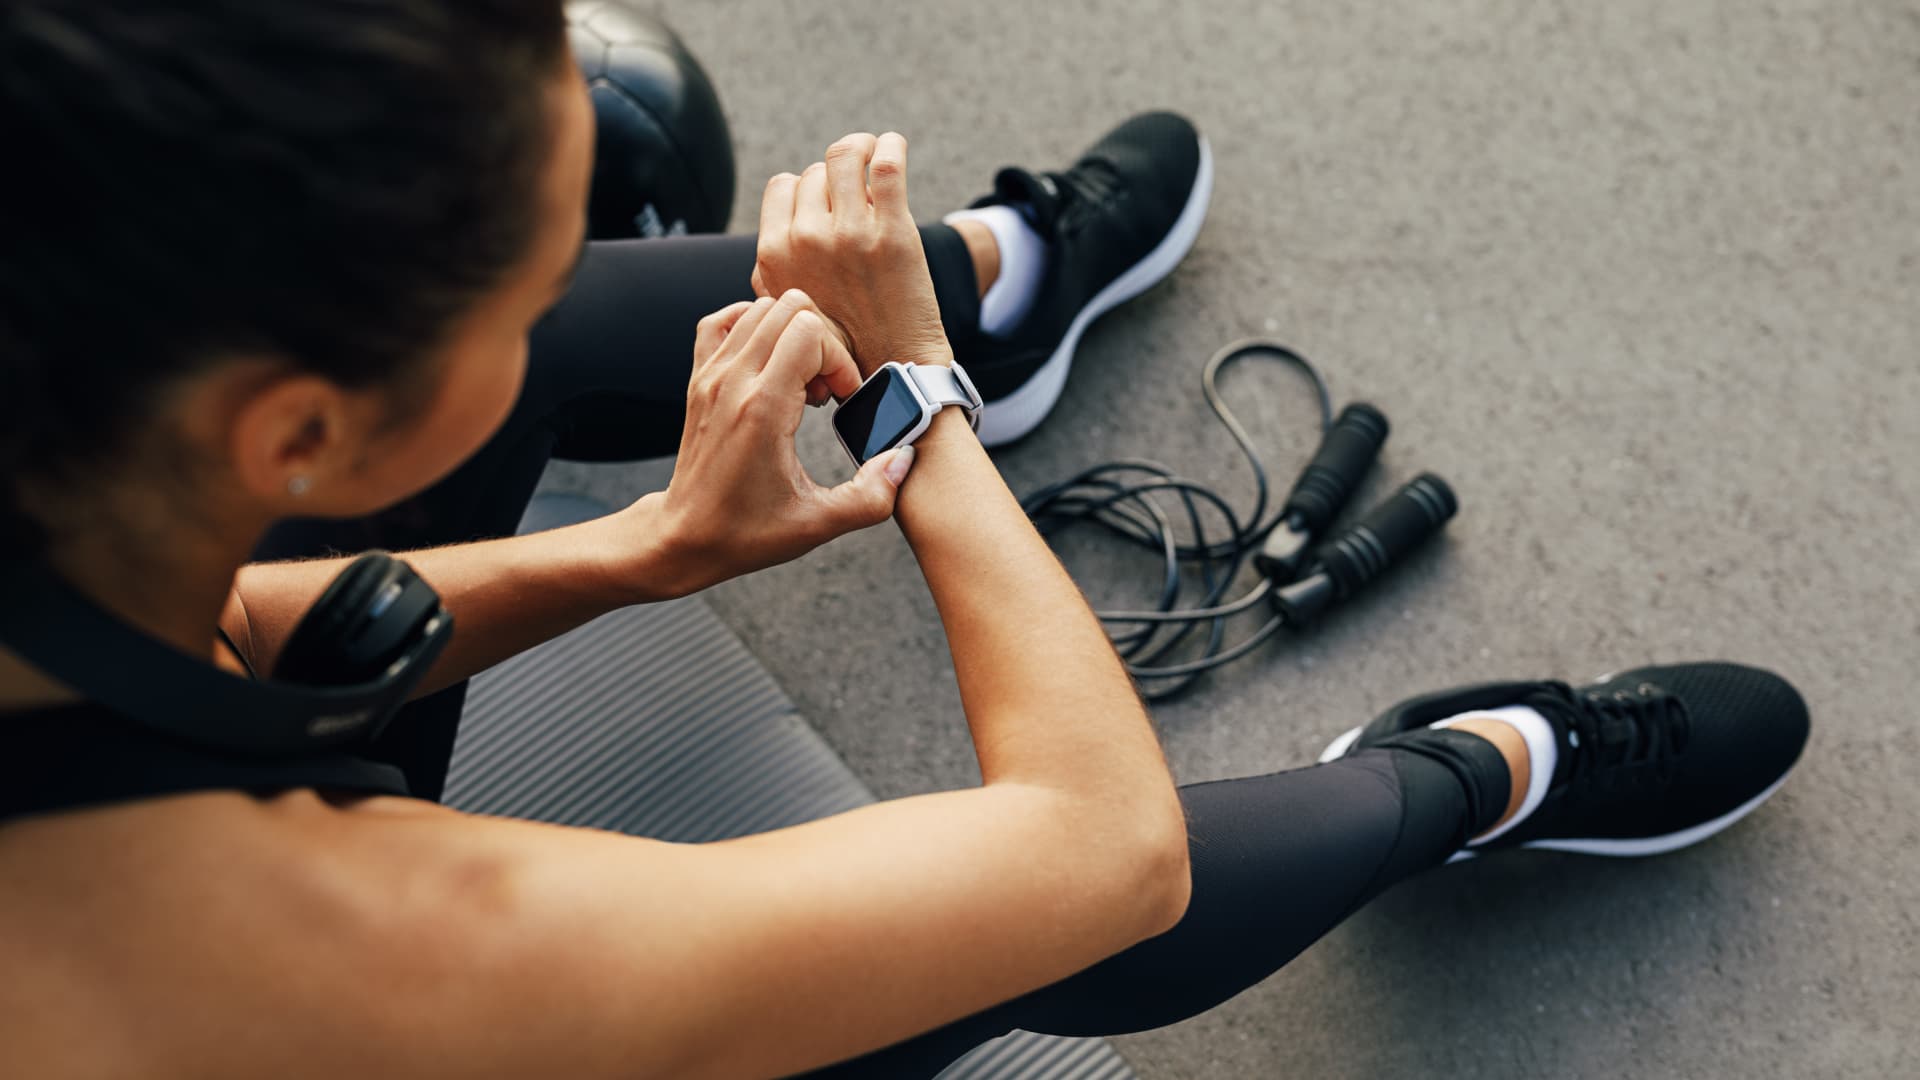 The biggest risks of using fitness trackers to monitor health